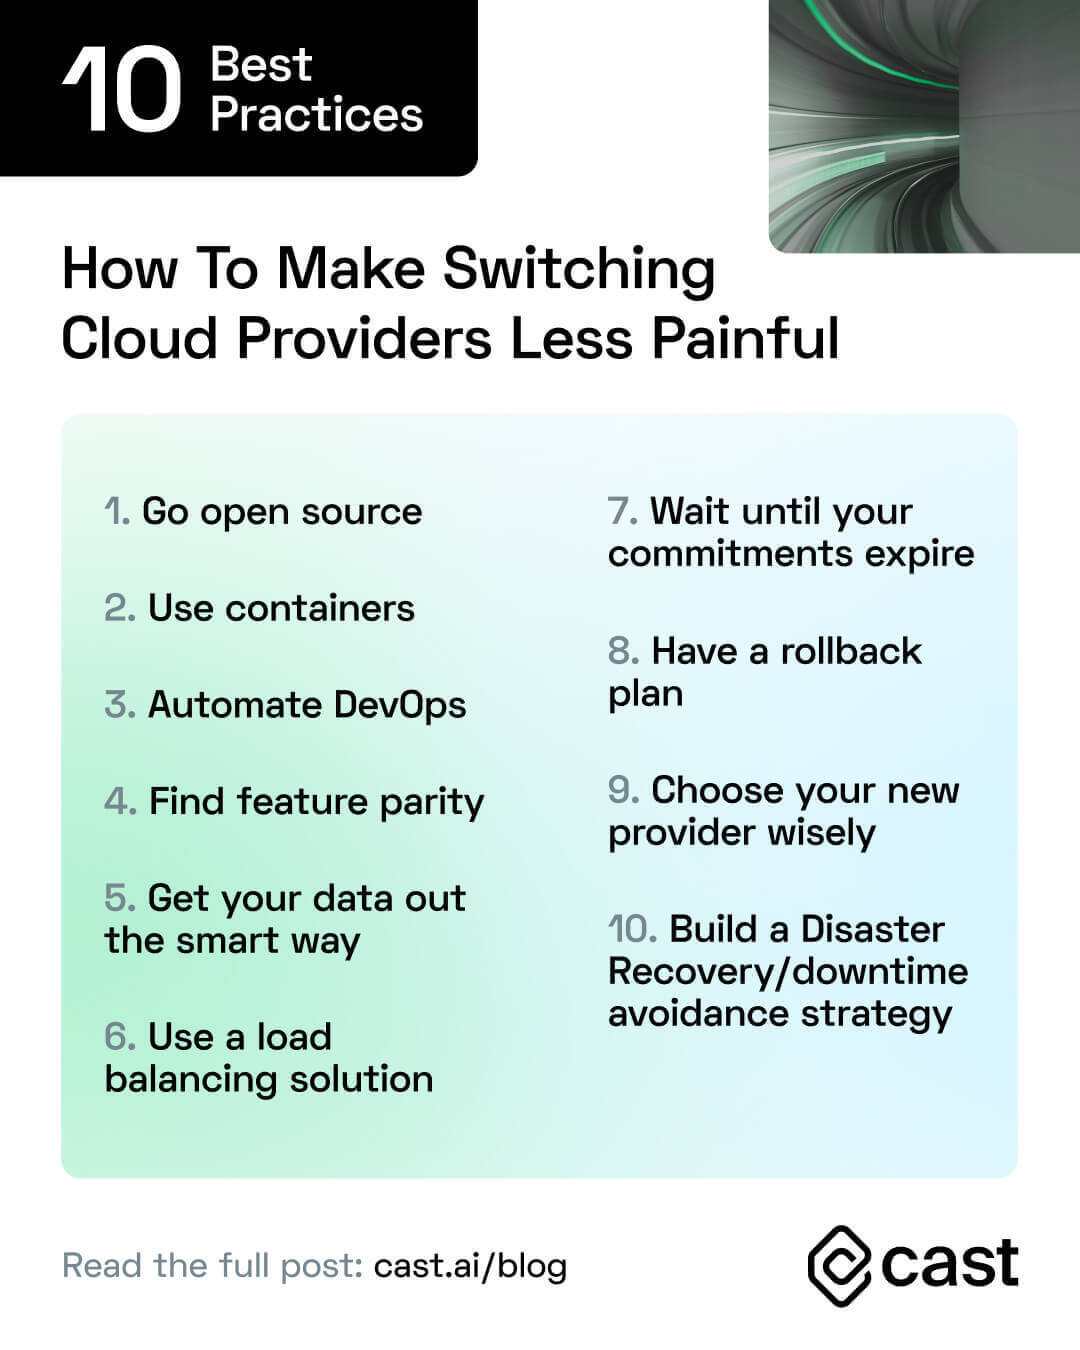 How to switch cloud providers